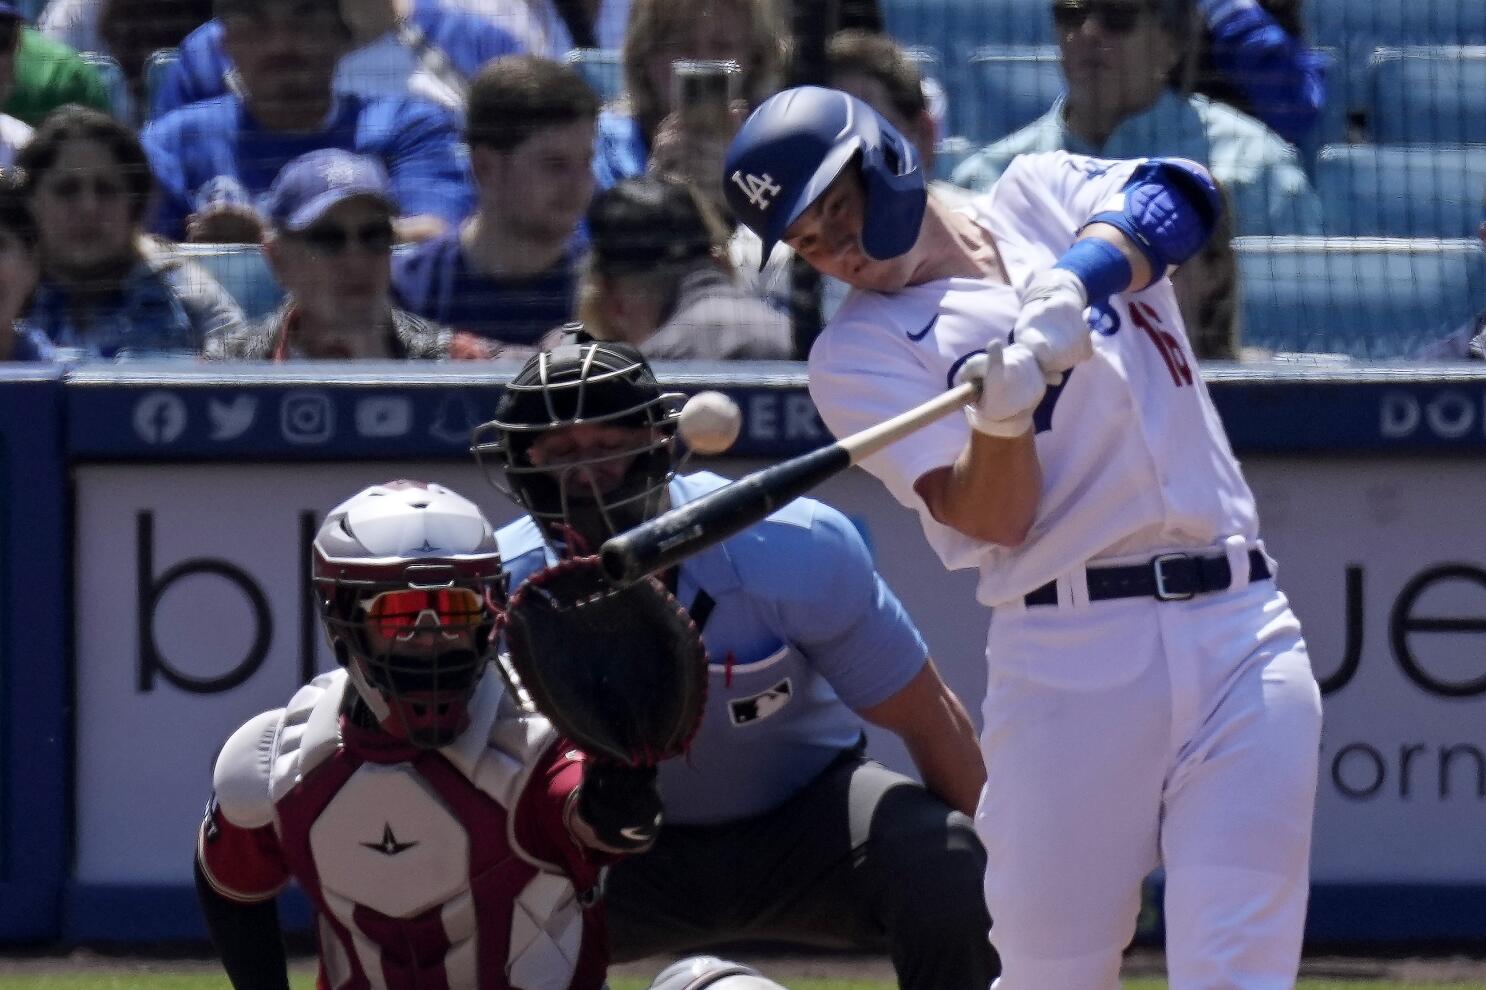 Hometown Series: Will Smith. The promising Dodger catcher has